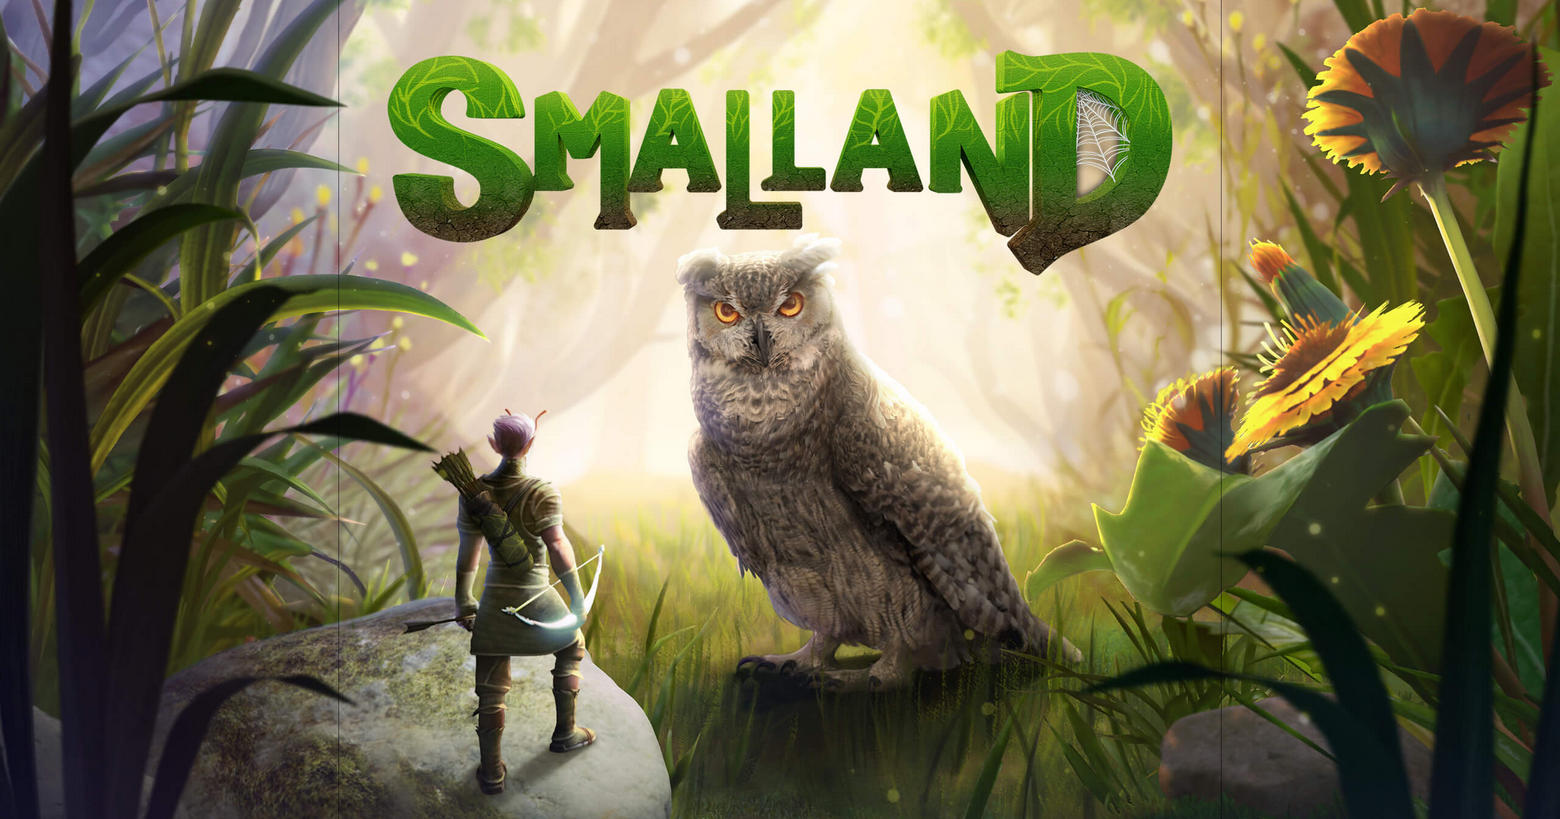 In this screenshot from Smalland we see an Owl with a serious gaze in the wide shot in the center of the image. It stands on a clearing brightly lit by daylight and looks directly at us. The sunlight comes directly from the background so that the owl stands out impressively in the picture. Above it, the title of the game "Smallland" can be read in large green letters, with the letters resembling leaves in their design. On the left and right we see numerous towering types of grass and on the right side, several yellow flowers are depicted. In the foreground on the left side, we can see a stone with a mini-character with pink hair, green cloth clothing, and brown tall pencils in a long shot. With his long ears sticking up, he reminds you of an elf creature. In your right hand, he holds a bow. The survival open-world game now has a release date.